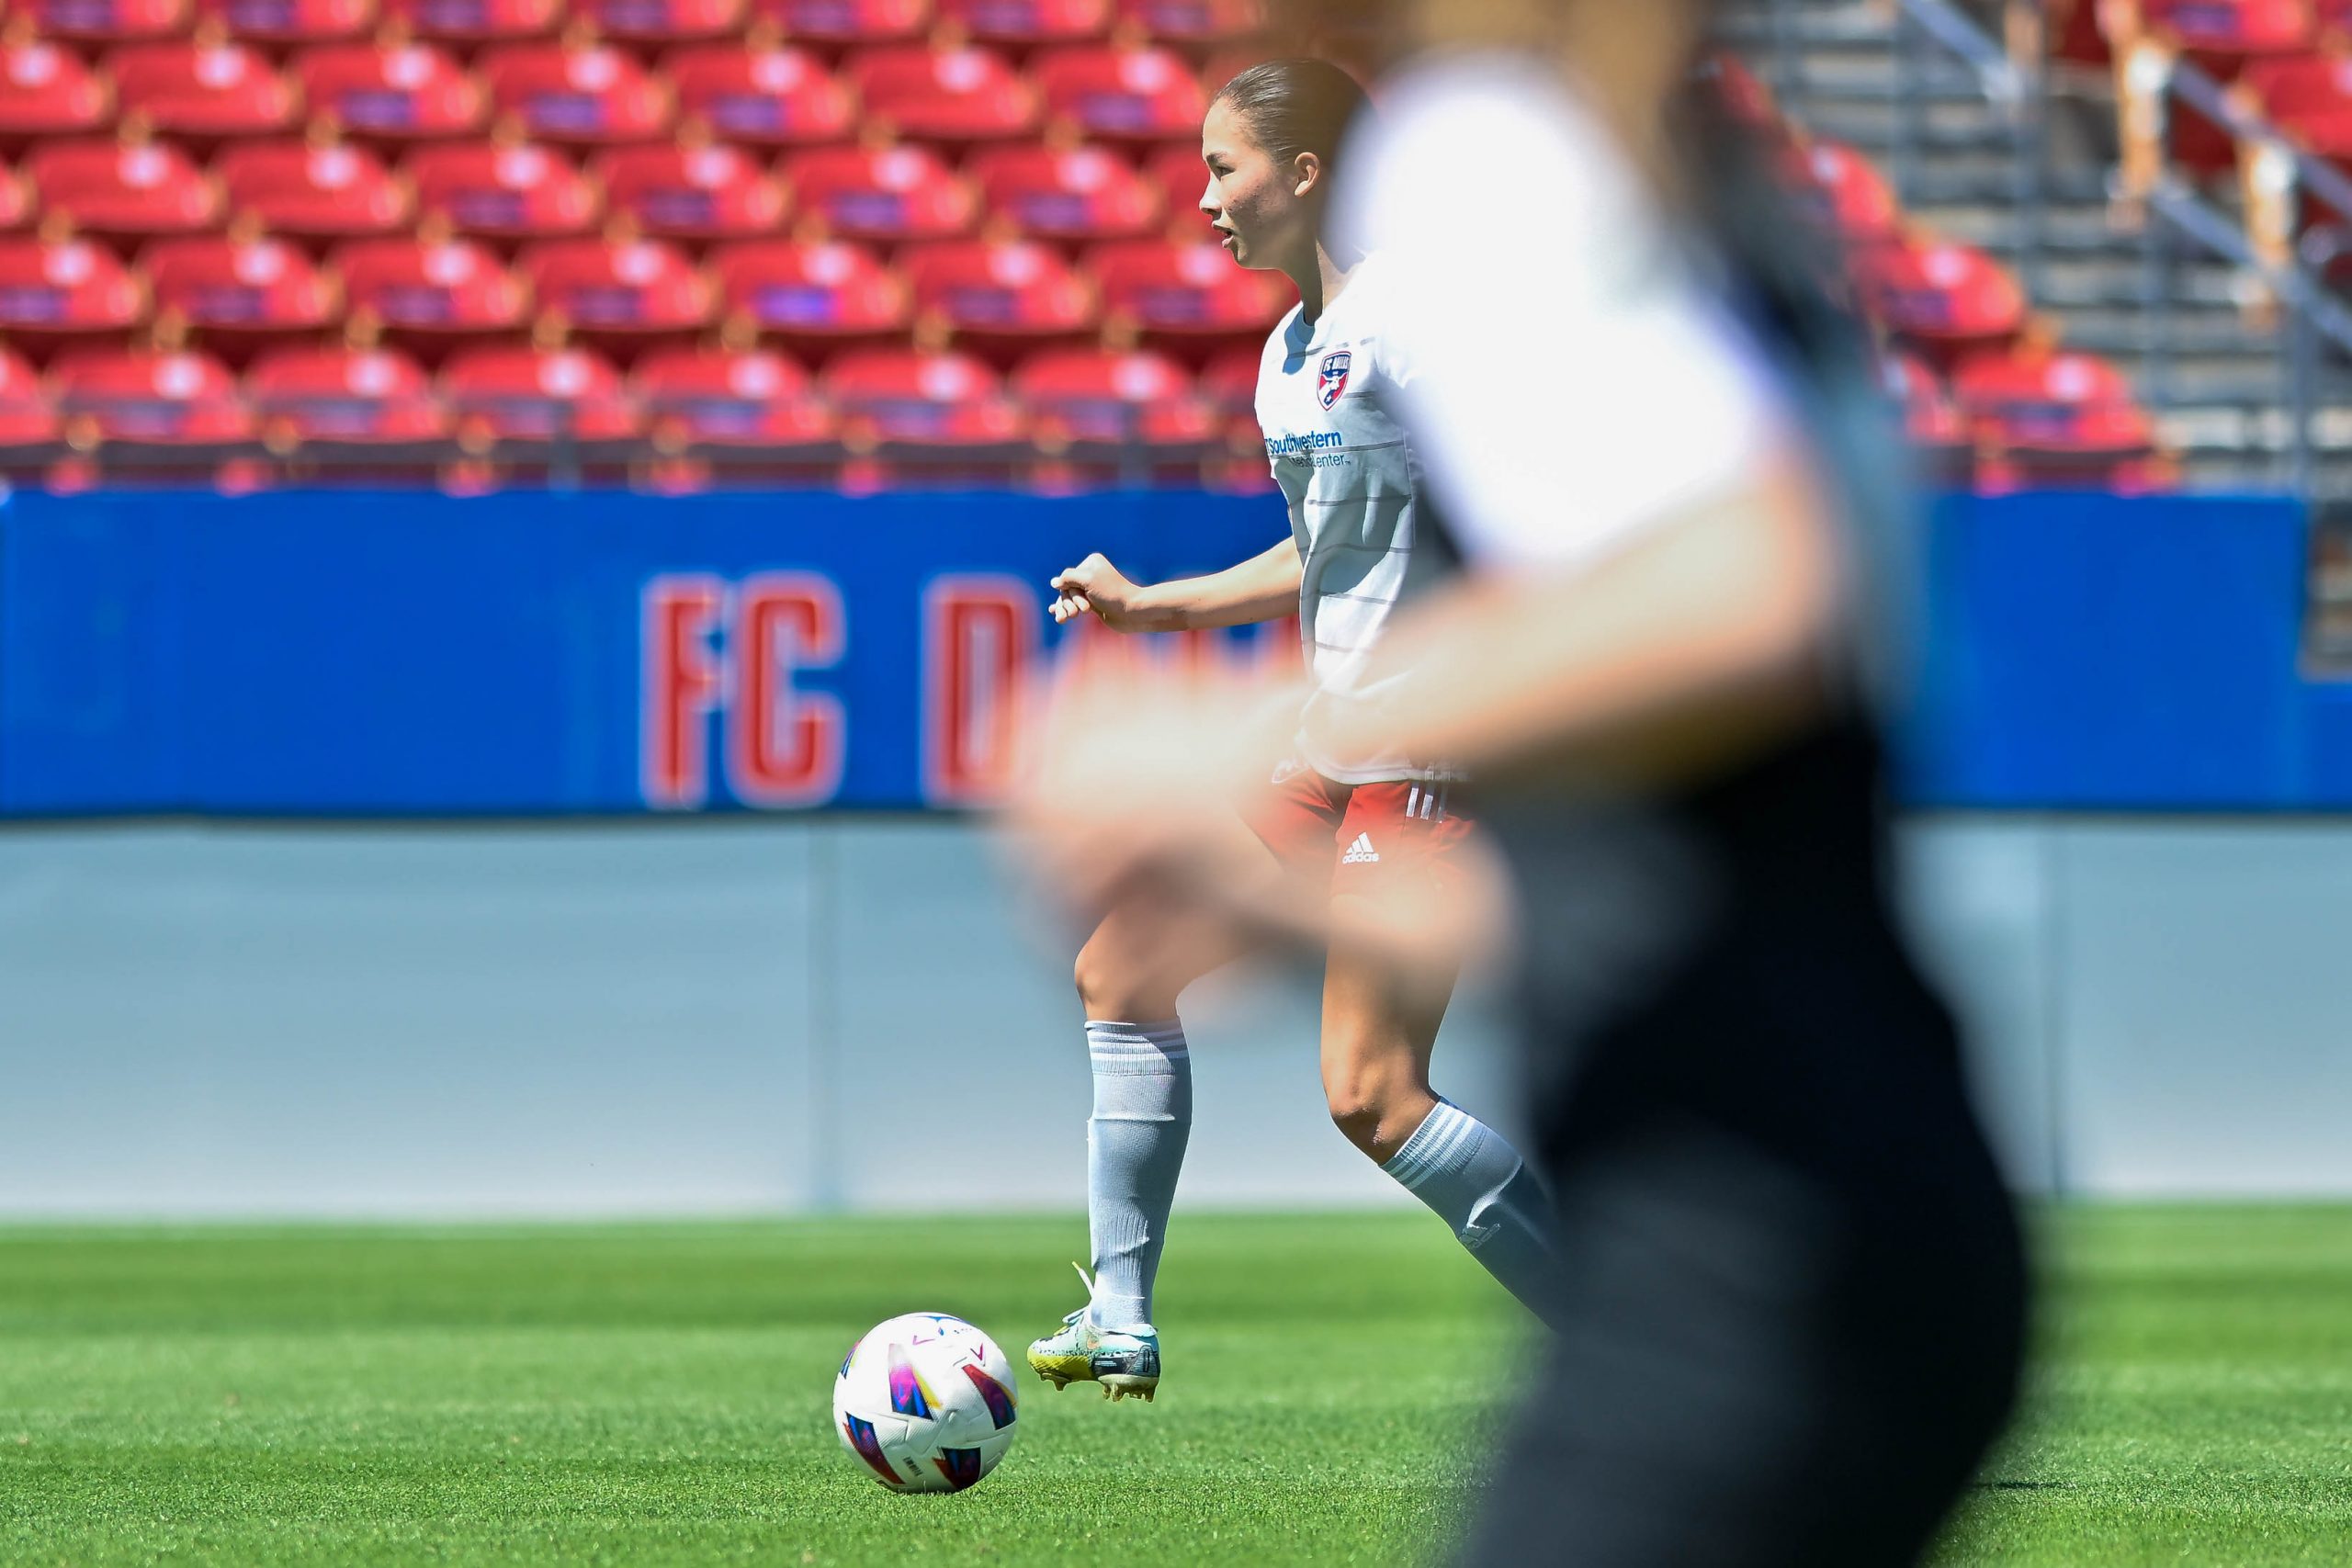 FC Dallas midfielder Kiara Gilmore scans the field while receiving the ball in the Dallas Cup U17 Final against Eintracht Frankfurt at Toyota Stadium on Saturday, March 29, 2024. (Daniel McCullough, 3rd Degree)